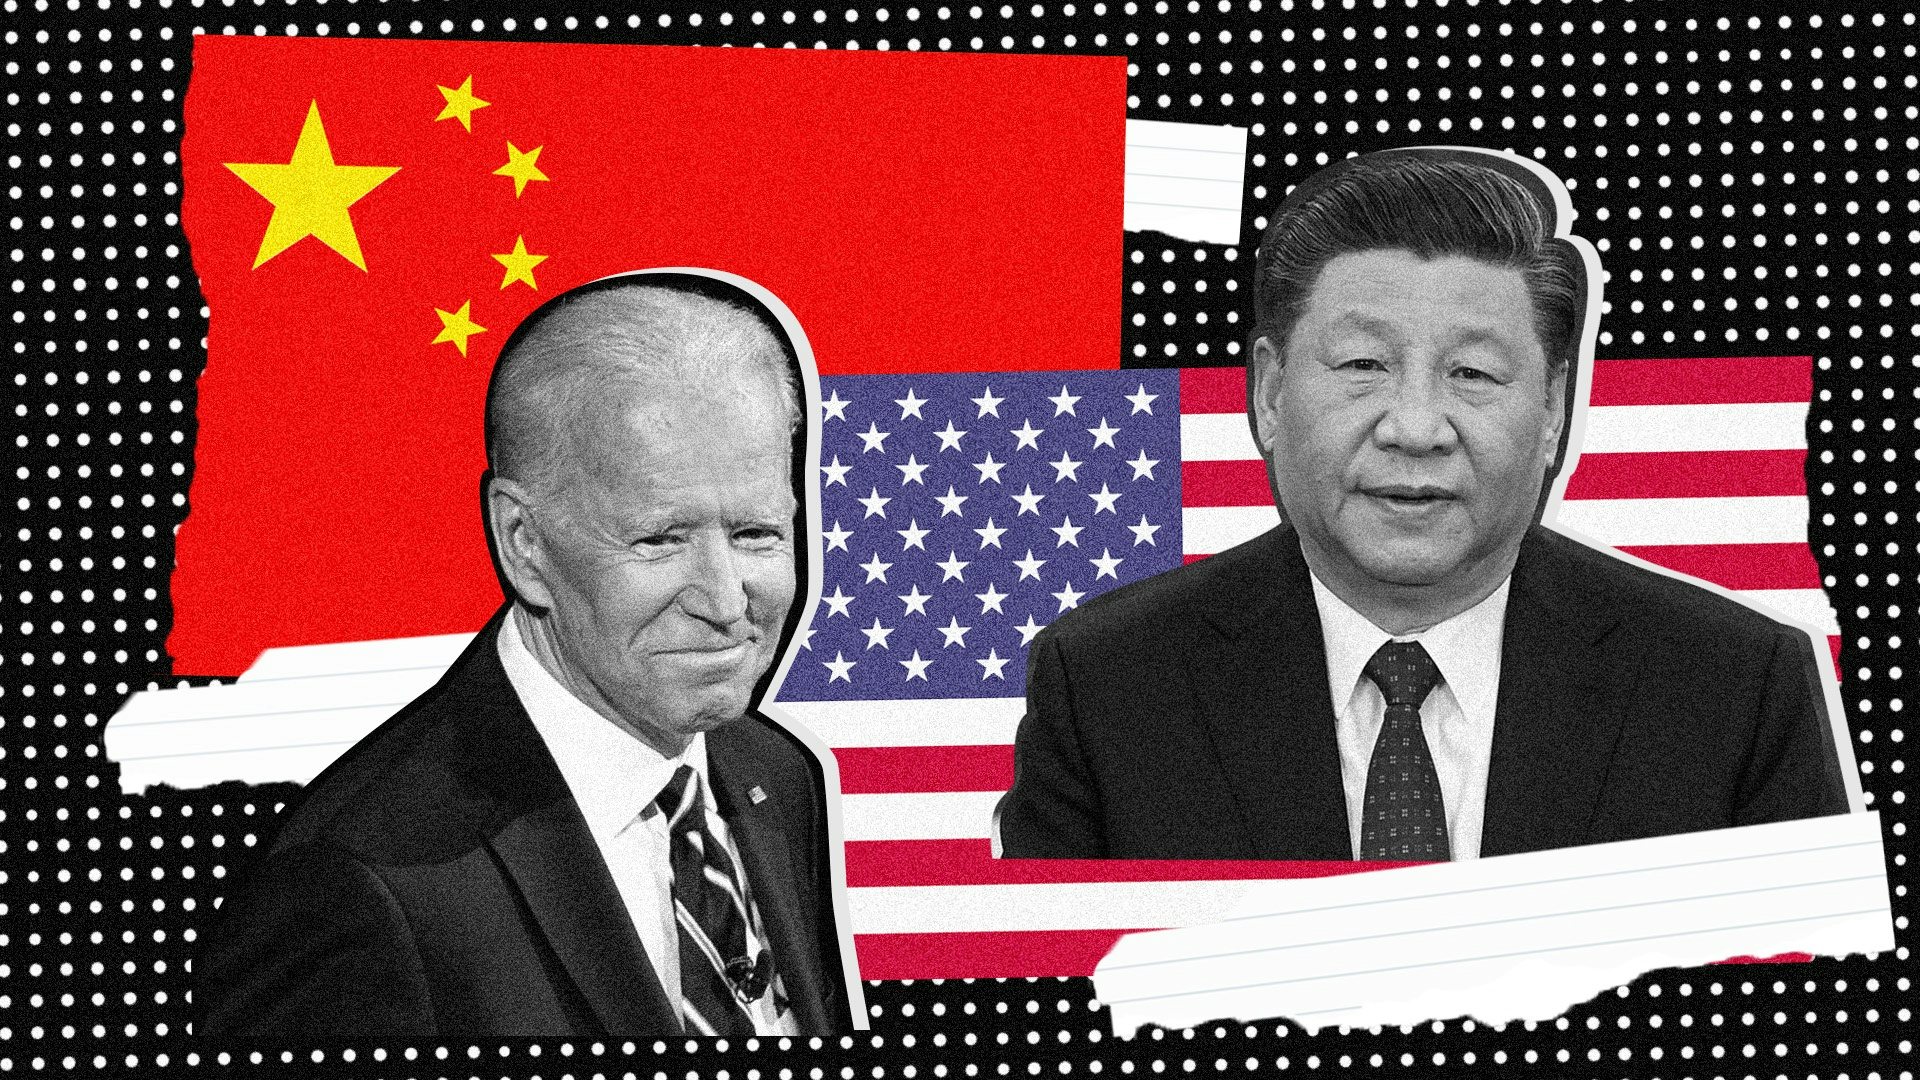 It’s expected that Biden will select a more measured style when dealing with China. How will this new approach affect luxury brands? Photo: Shutterstock, The New York Times. Composite: Haitong Zheng.